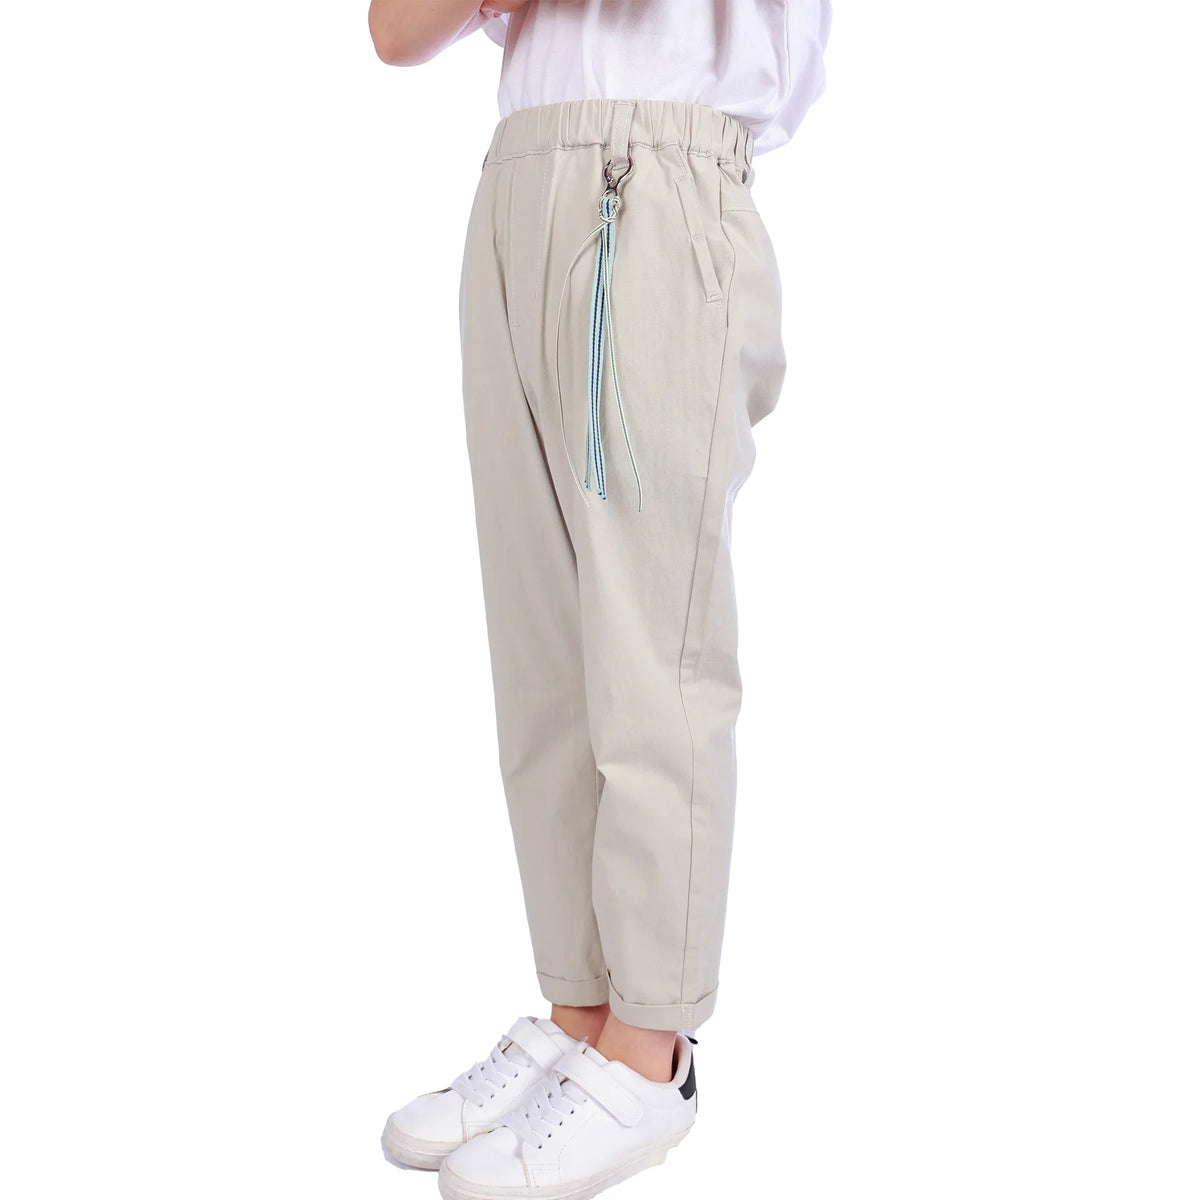 Ordinary Classic Pants For Boys